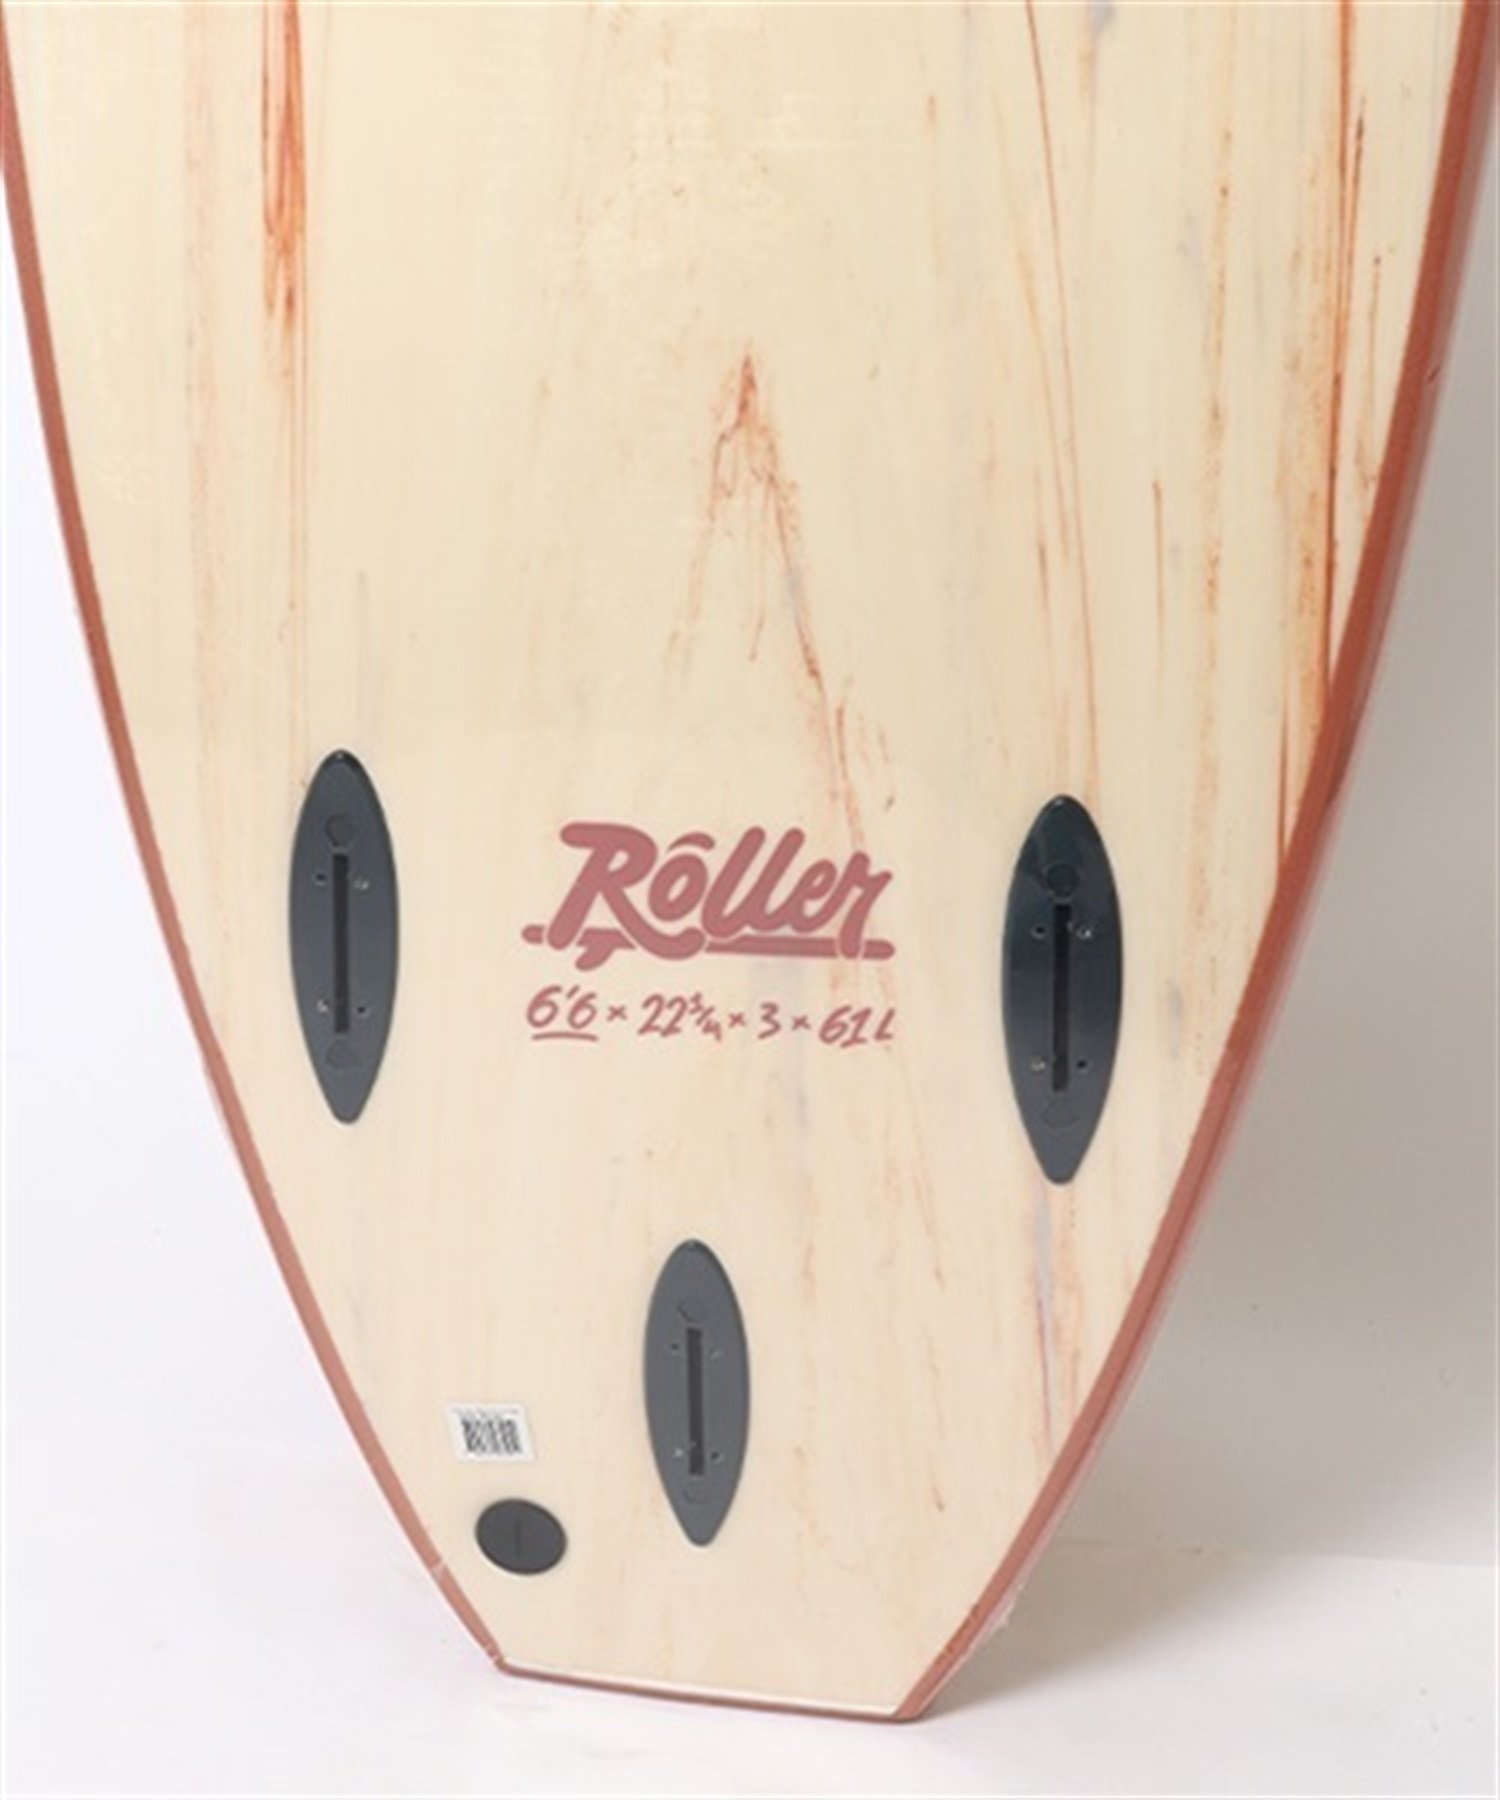 SOFTECH ソフテック ROLLER ローラー 7'0 CLY サーフボード ミッド ソフトボード JJ E31(CLY-7.0)